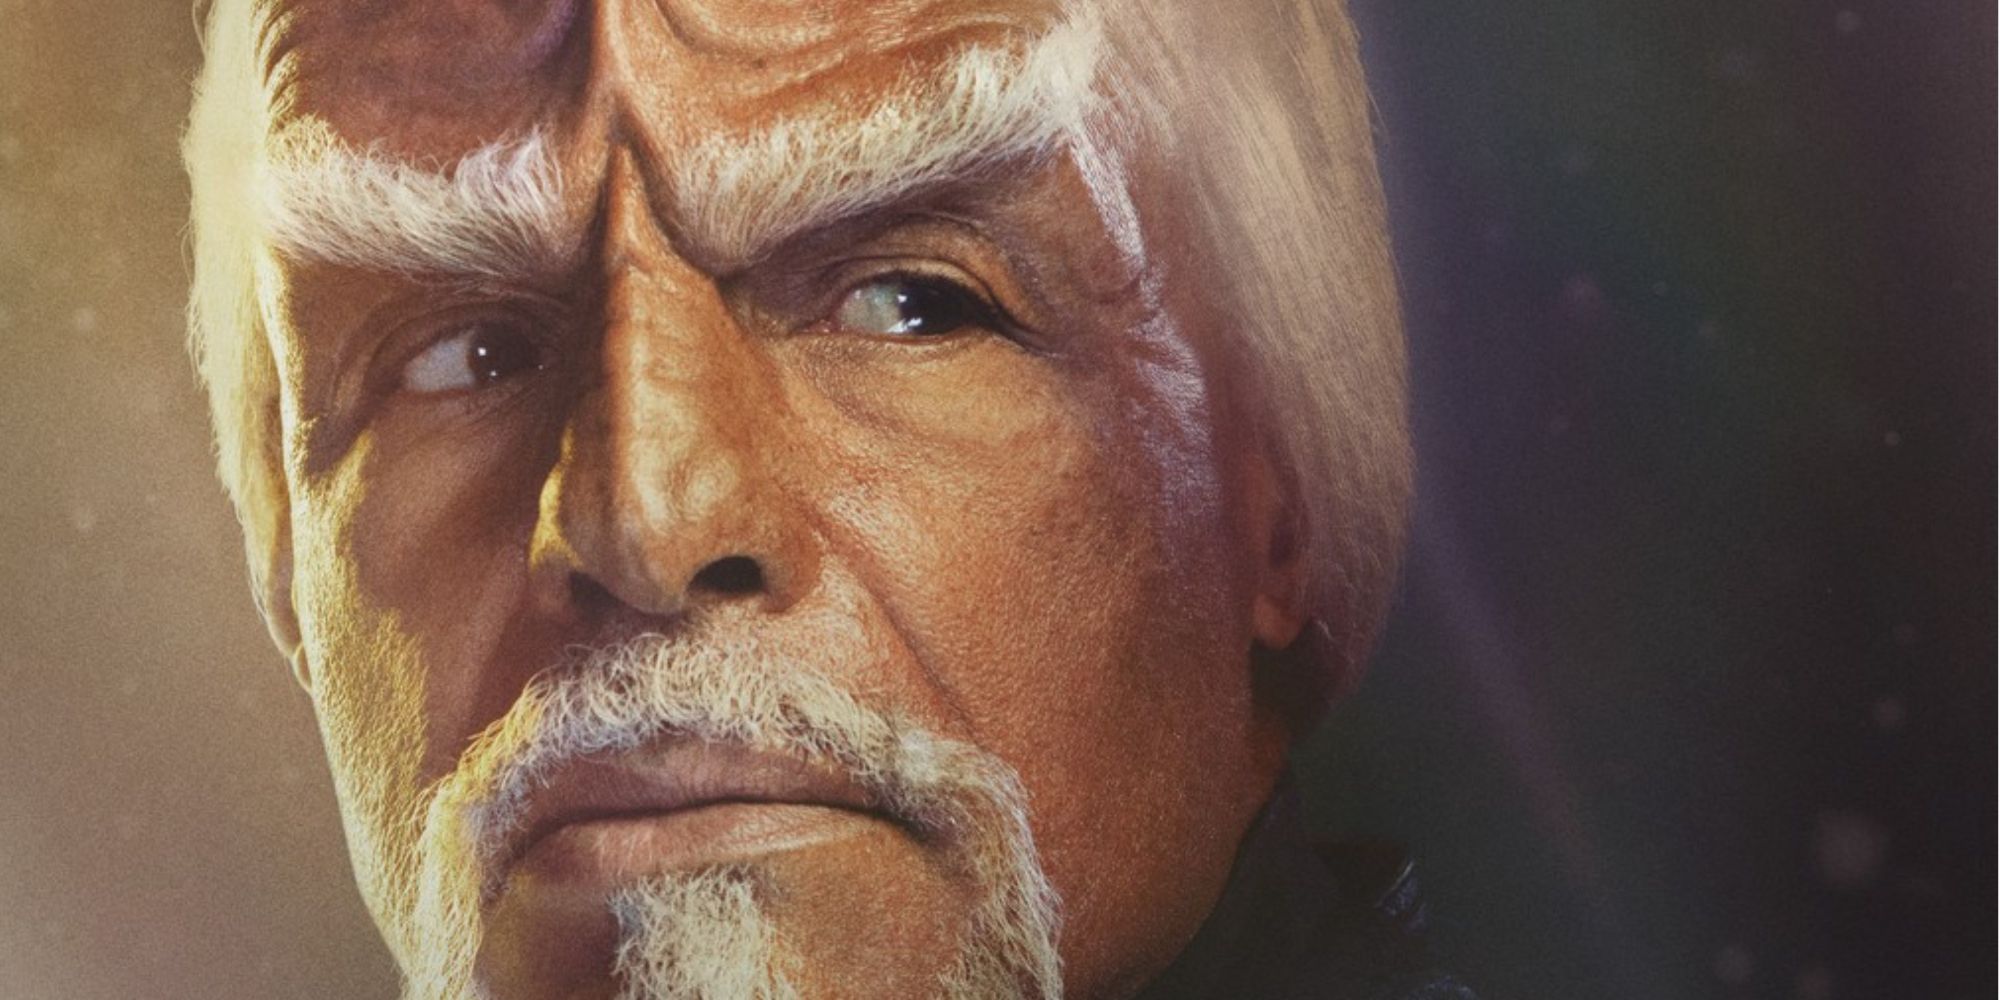 Worf appears in a promotional image from Star Trek: Picard season three.